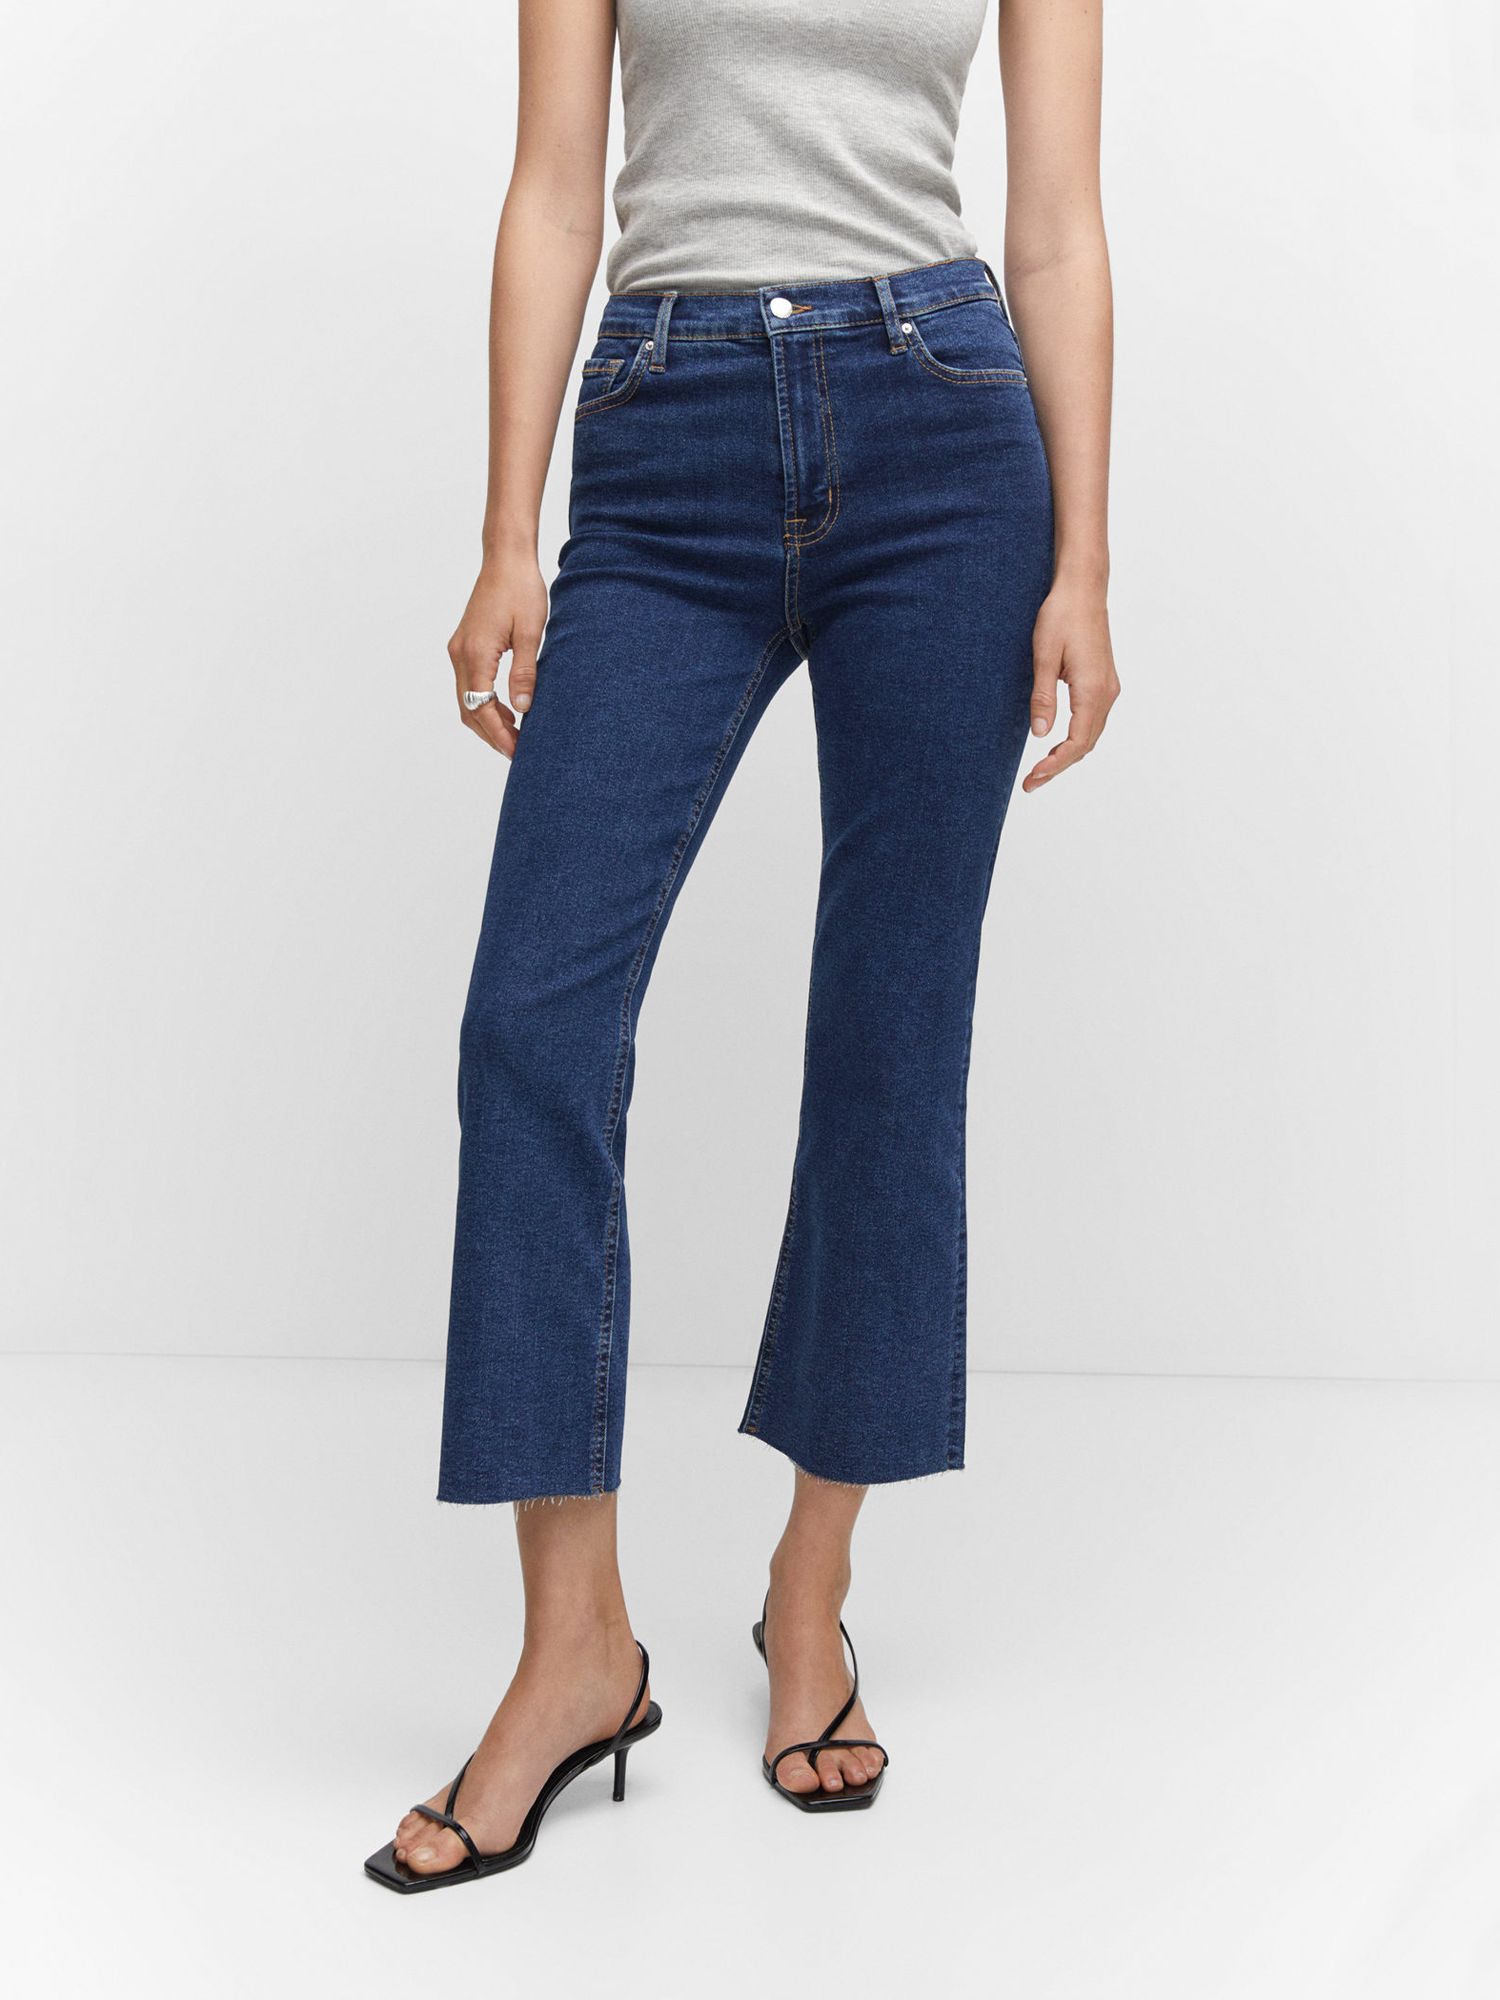 Mango Sienne Cropped Flared Jeans, Open Blue at John Lewis & Partners